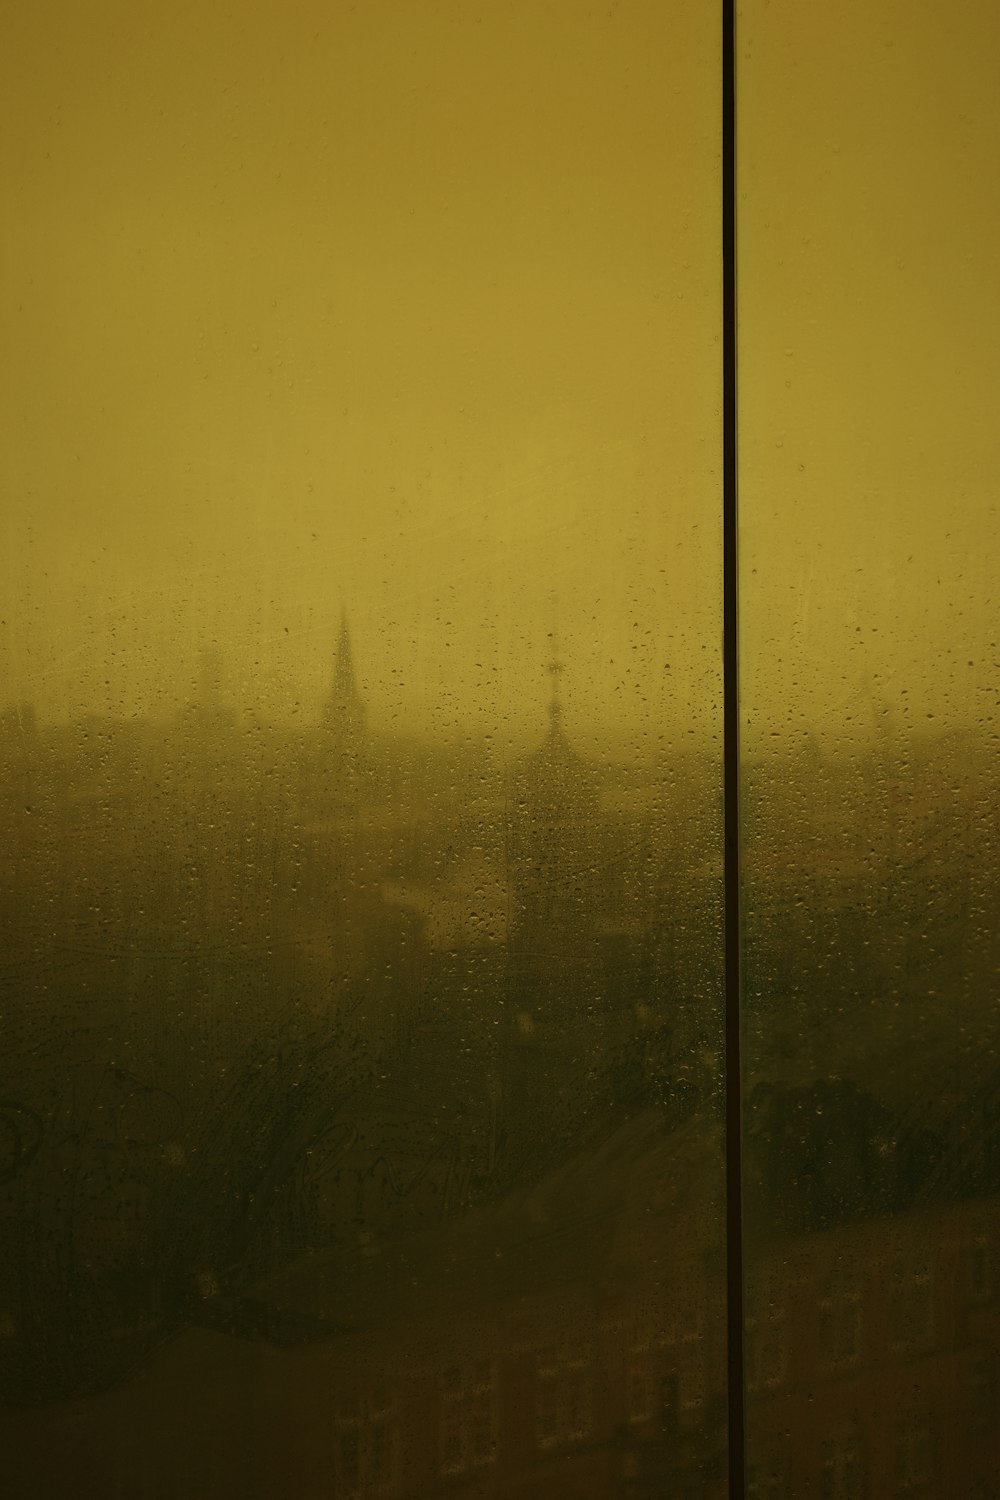 a view of a city through a window